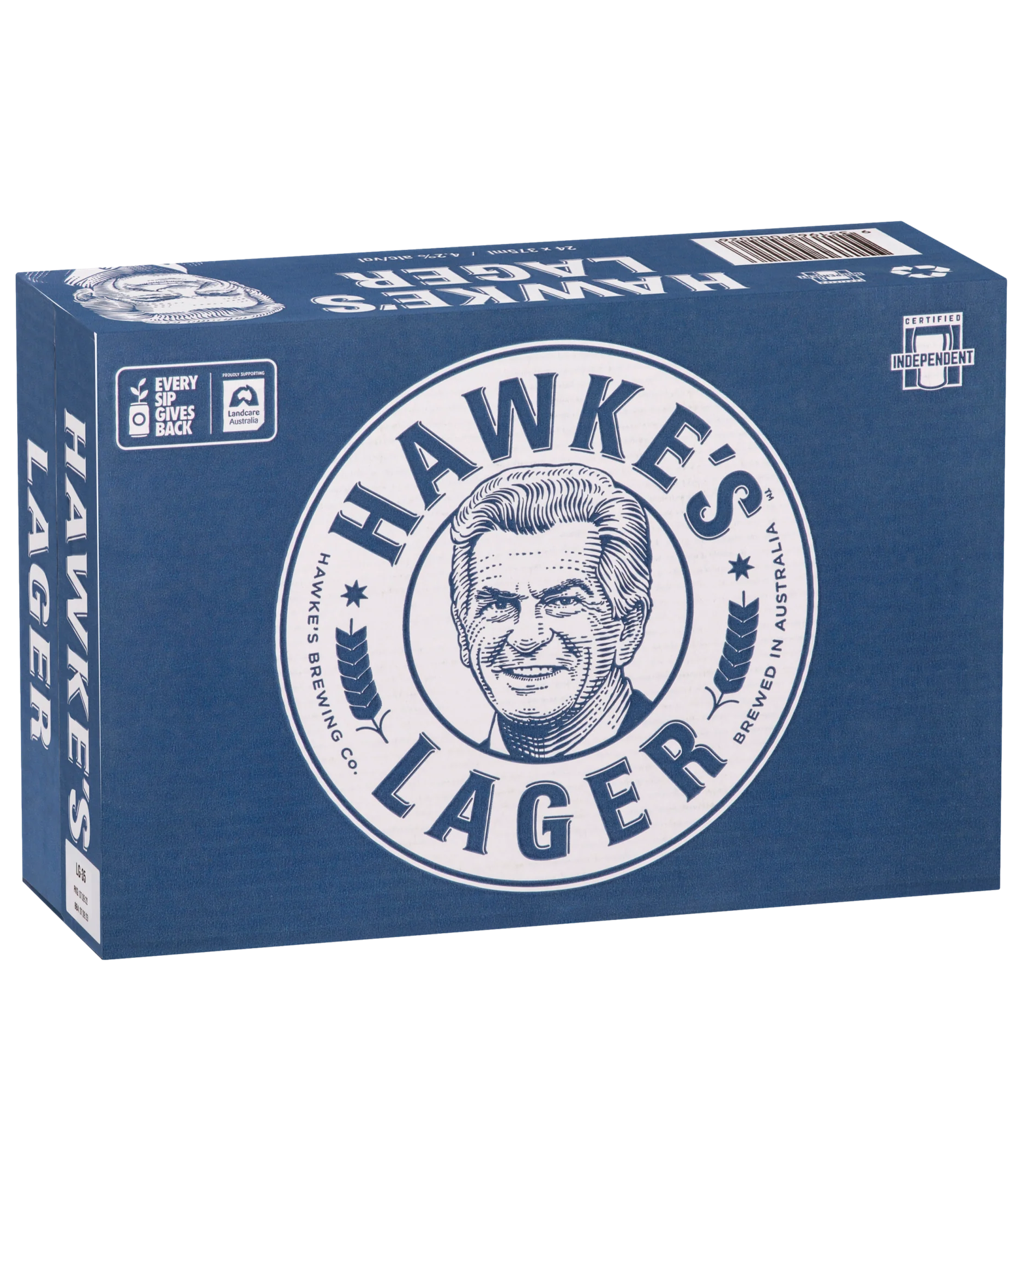 Hawkes Lager Case 24x 375mL